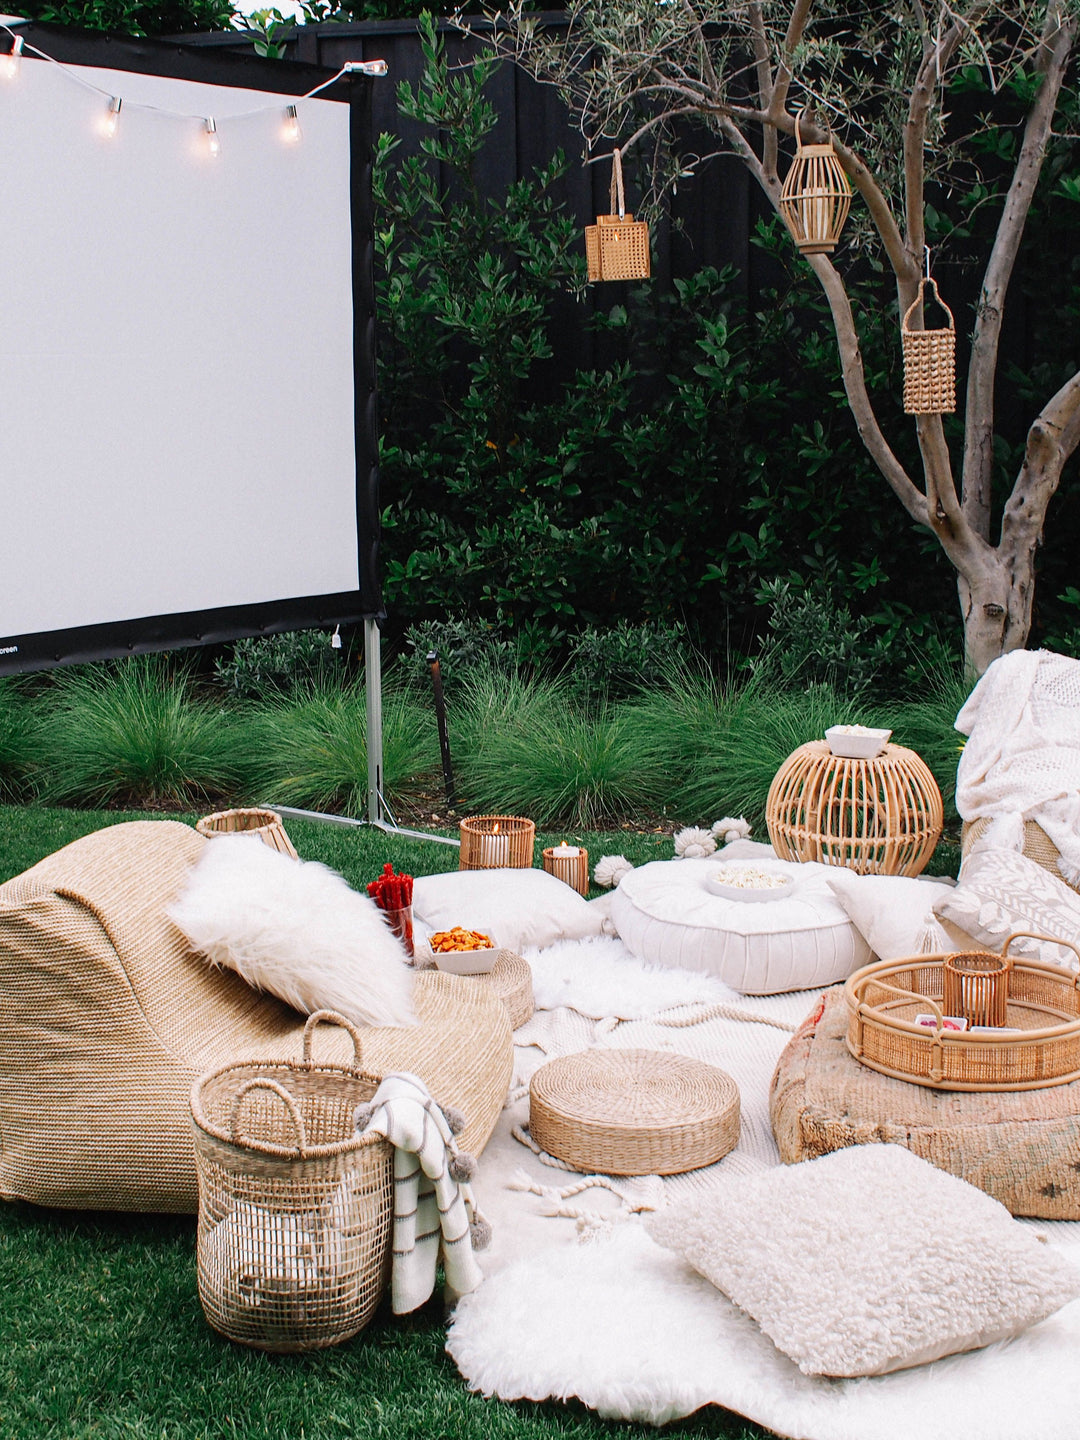 Outdoor movie night setup with comfy chairs, pillows, movie screen and lights